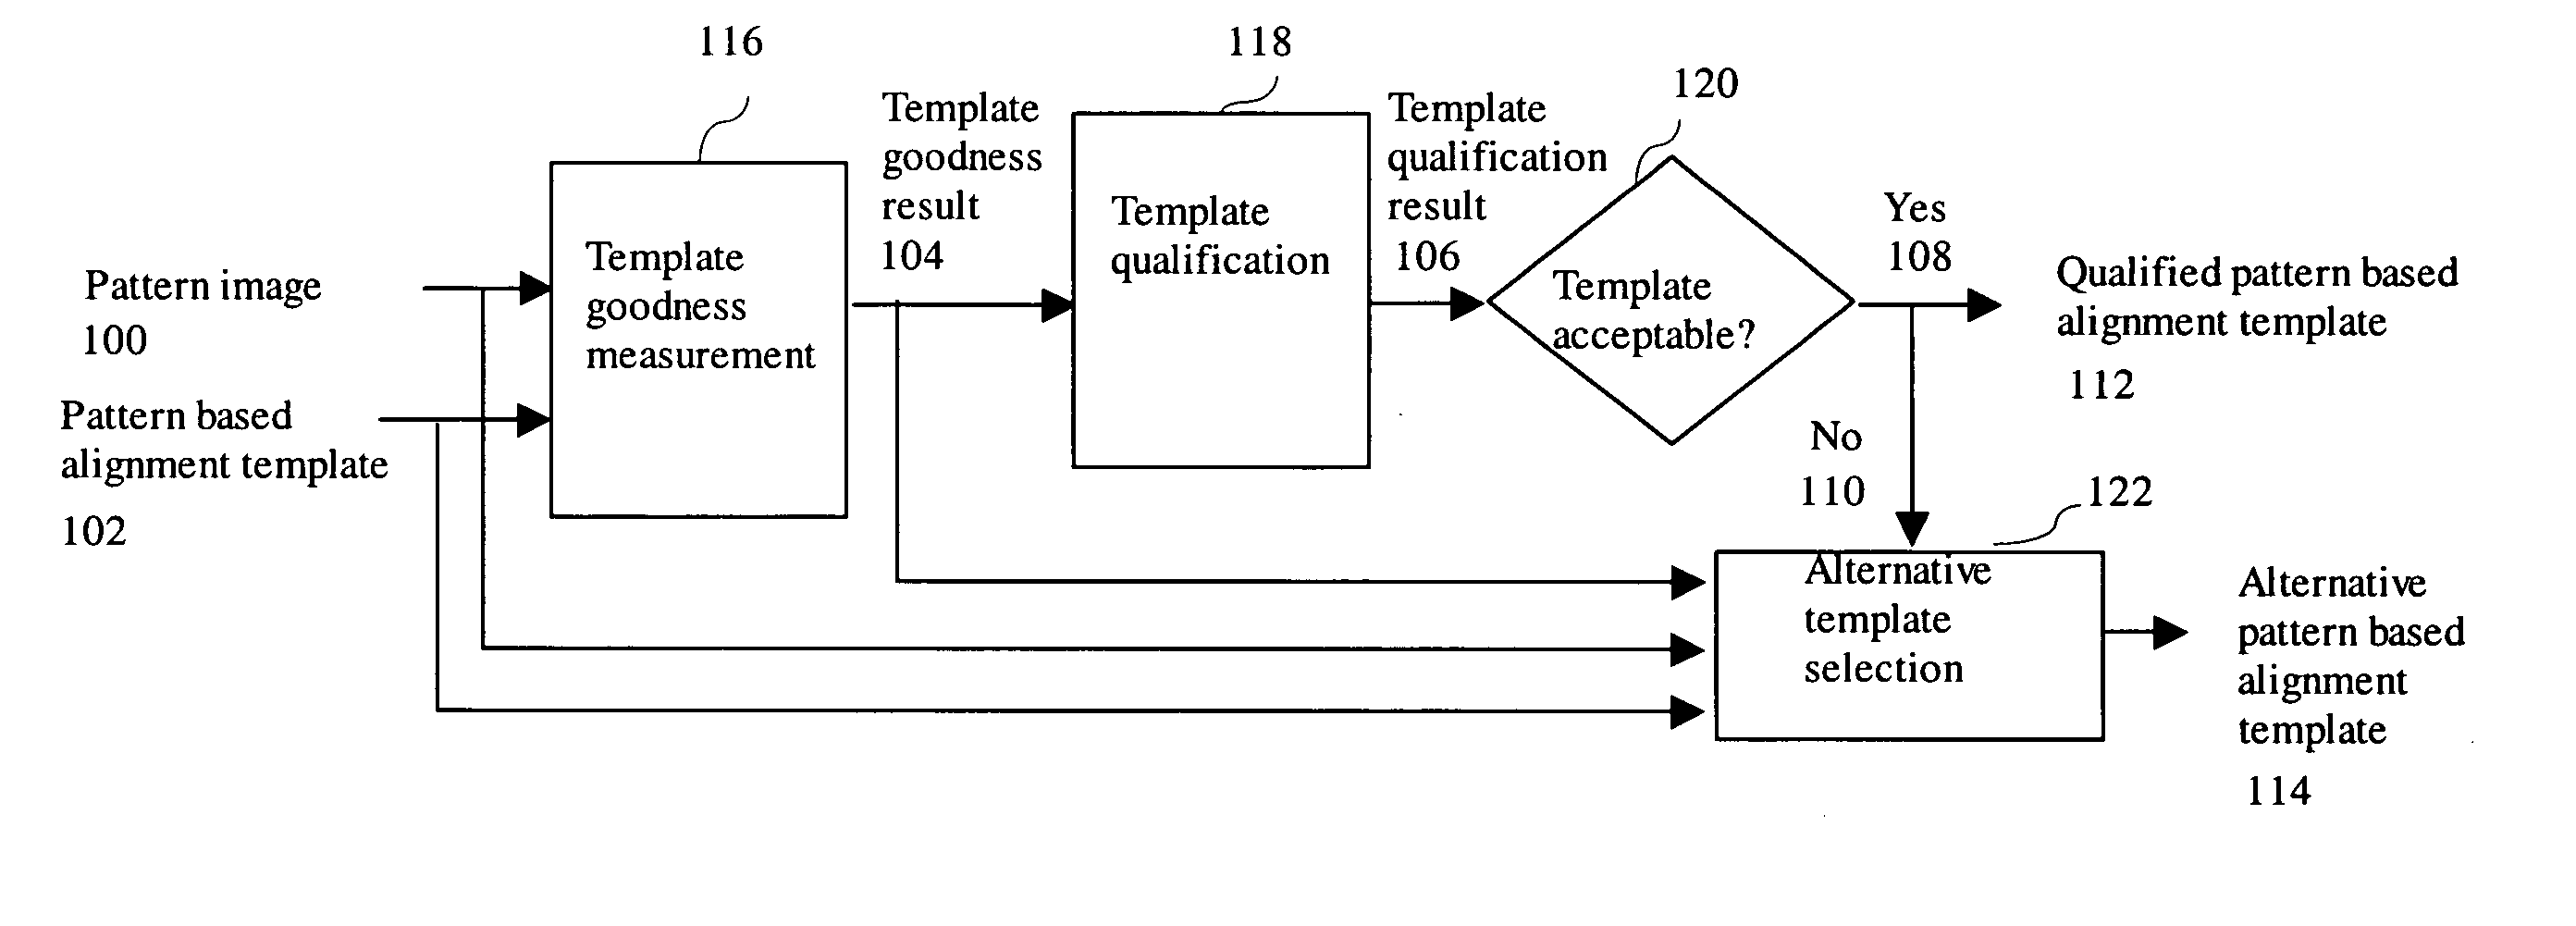 Alignment template goodness qualification method